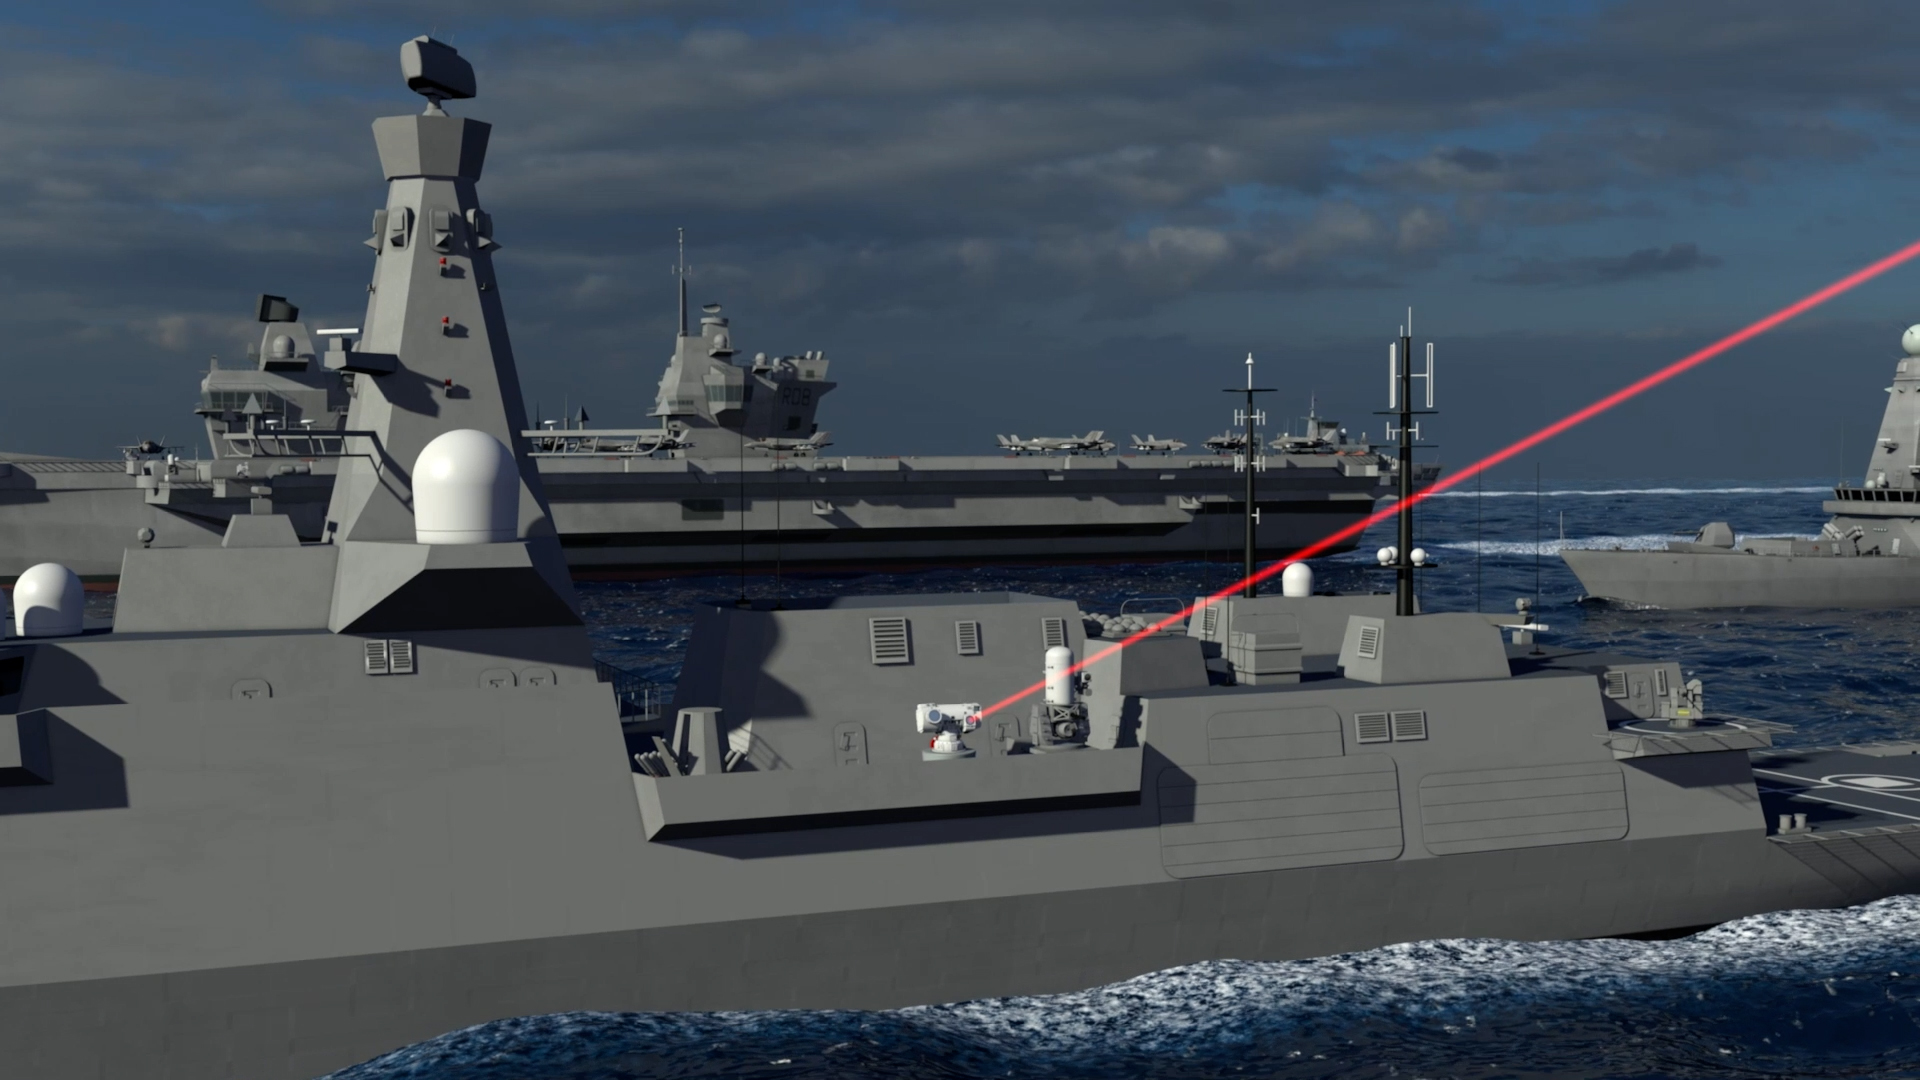 Powerful laser to be installed on Royal Navy warship by 2027